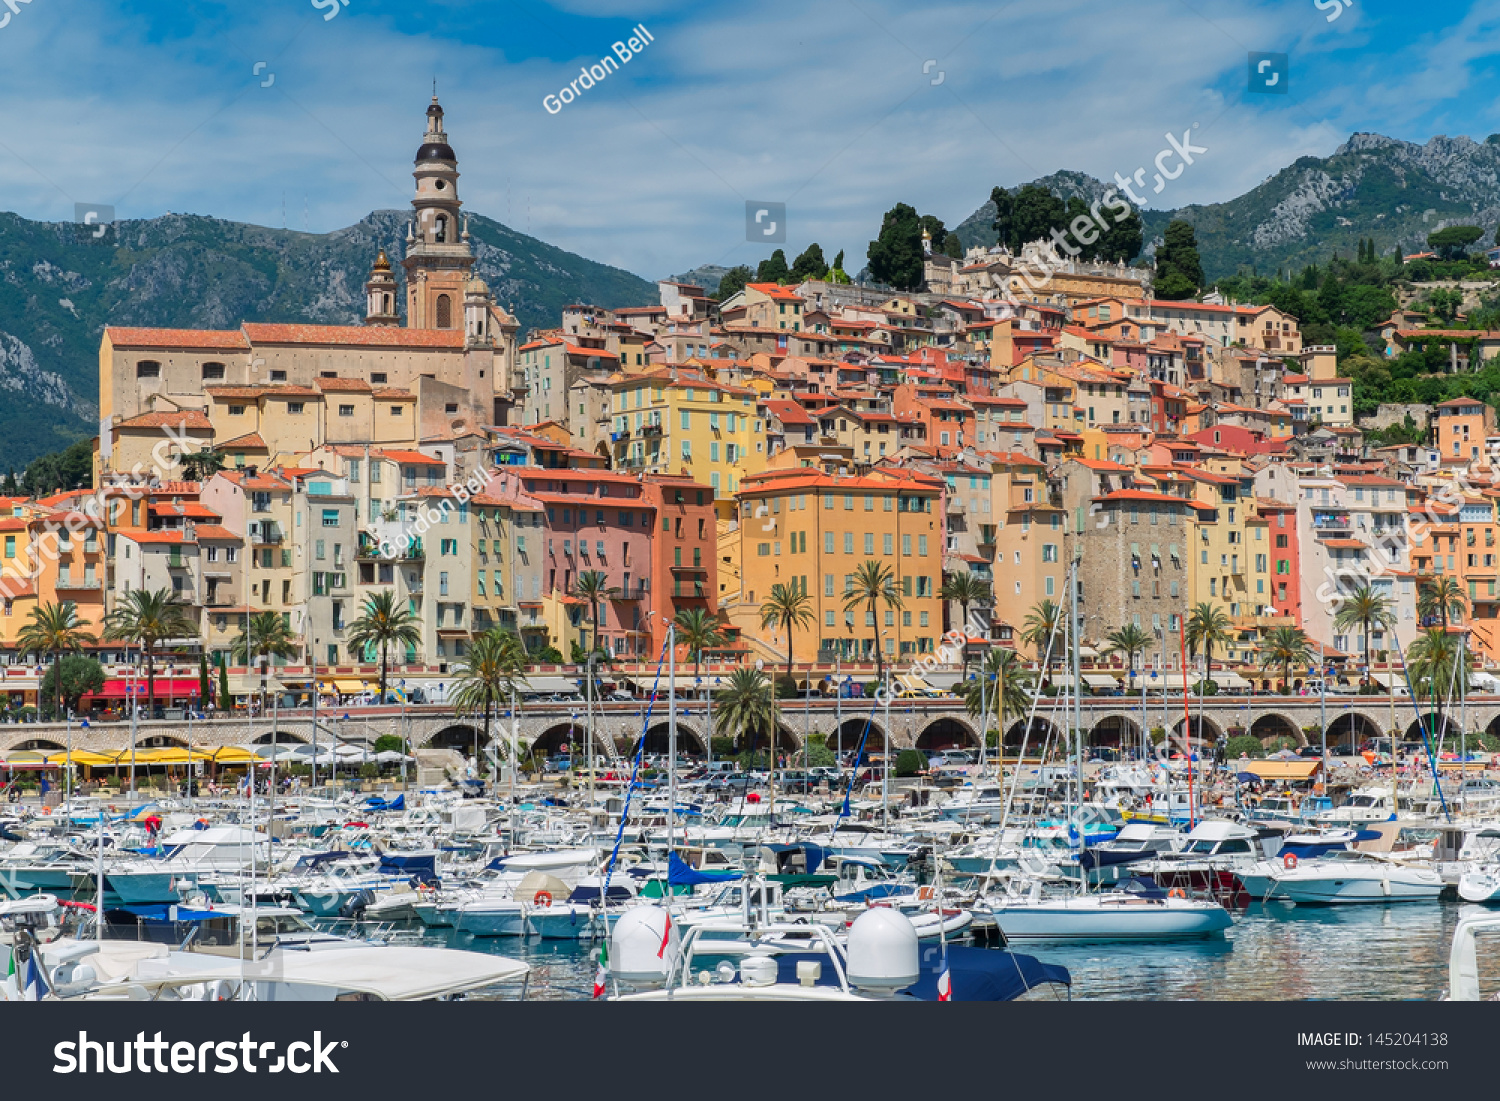 Colourful Menton Harbour And Town On The Cote D'Azur Stock Photo ...